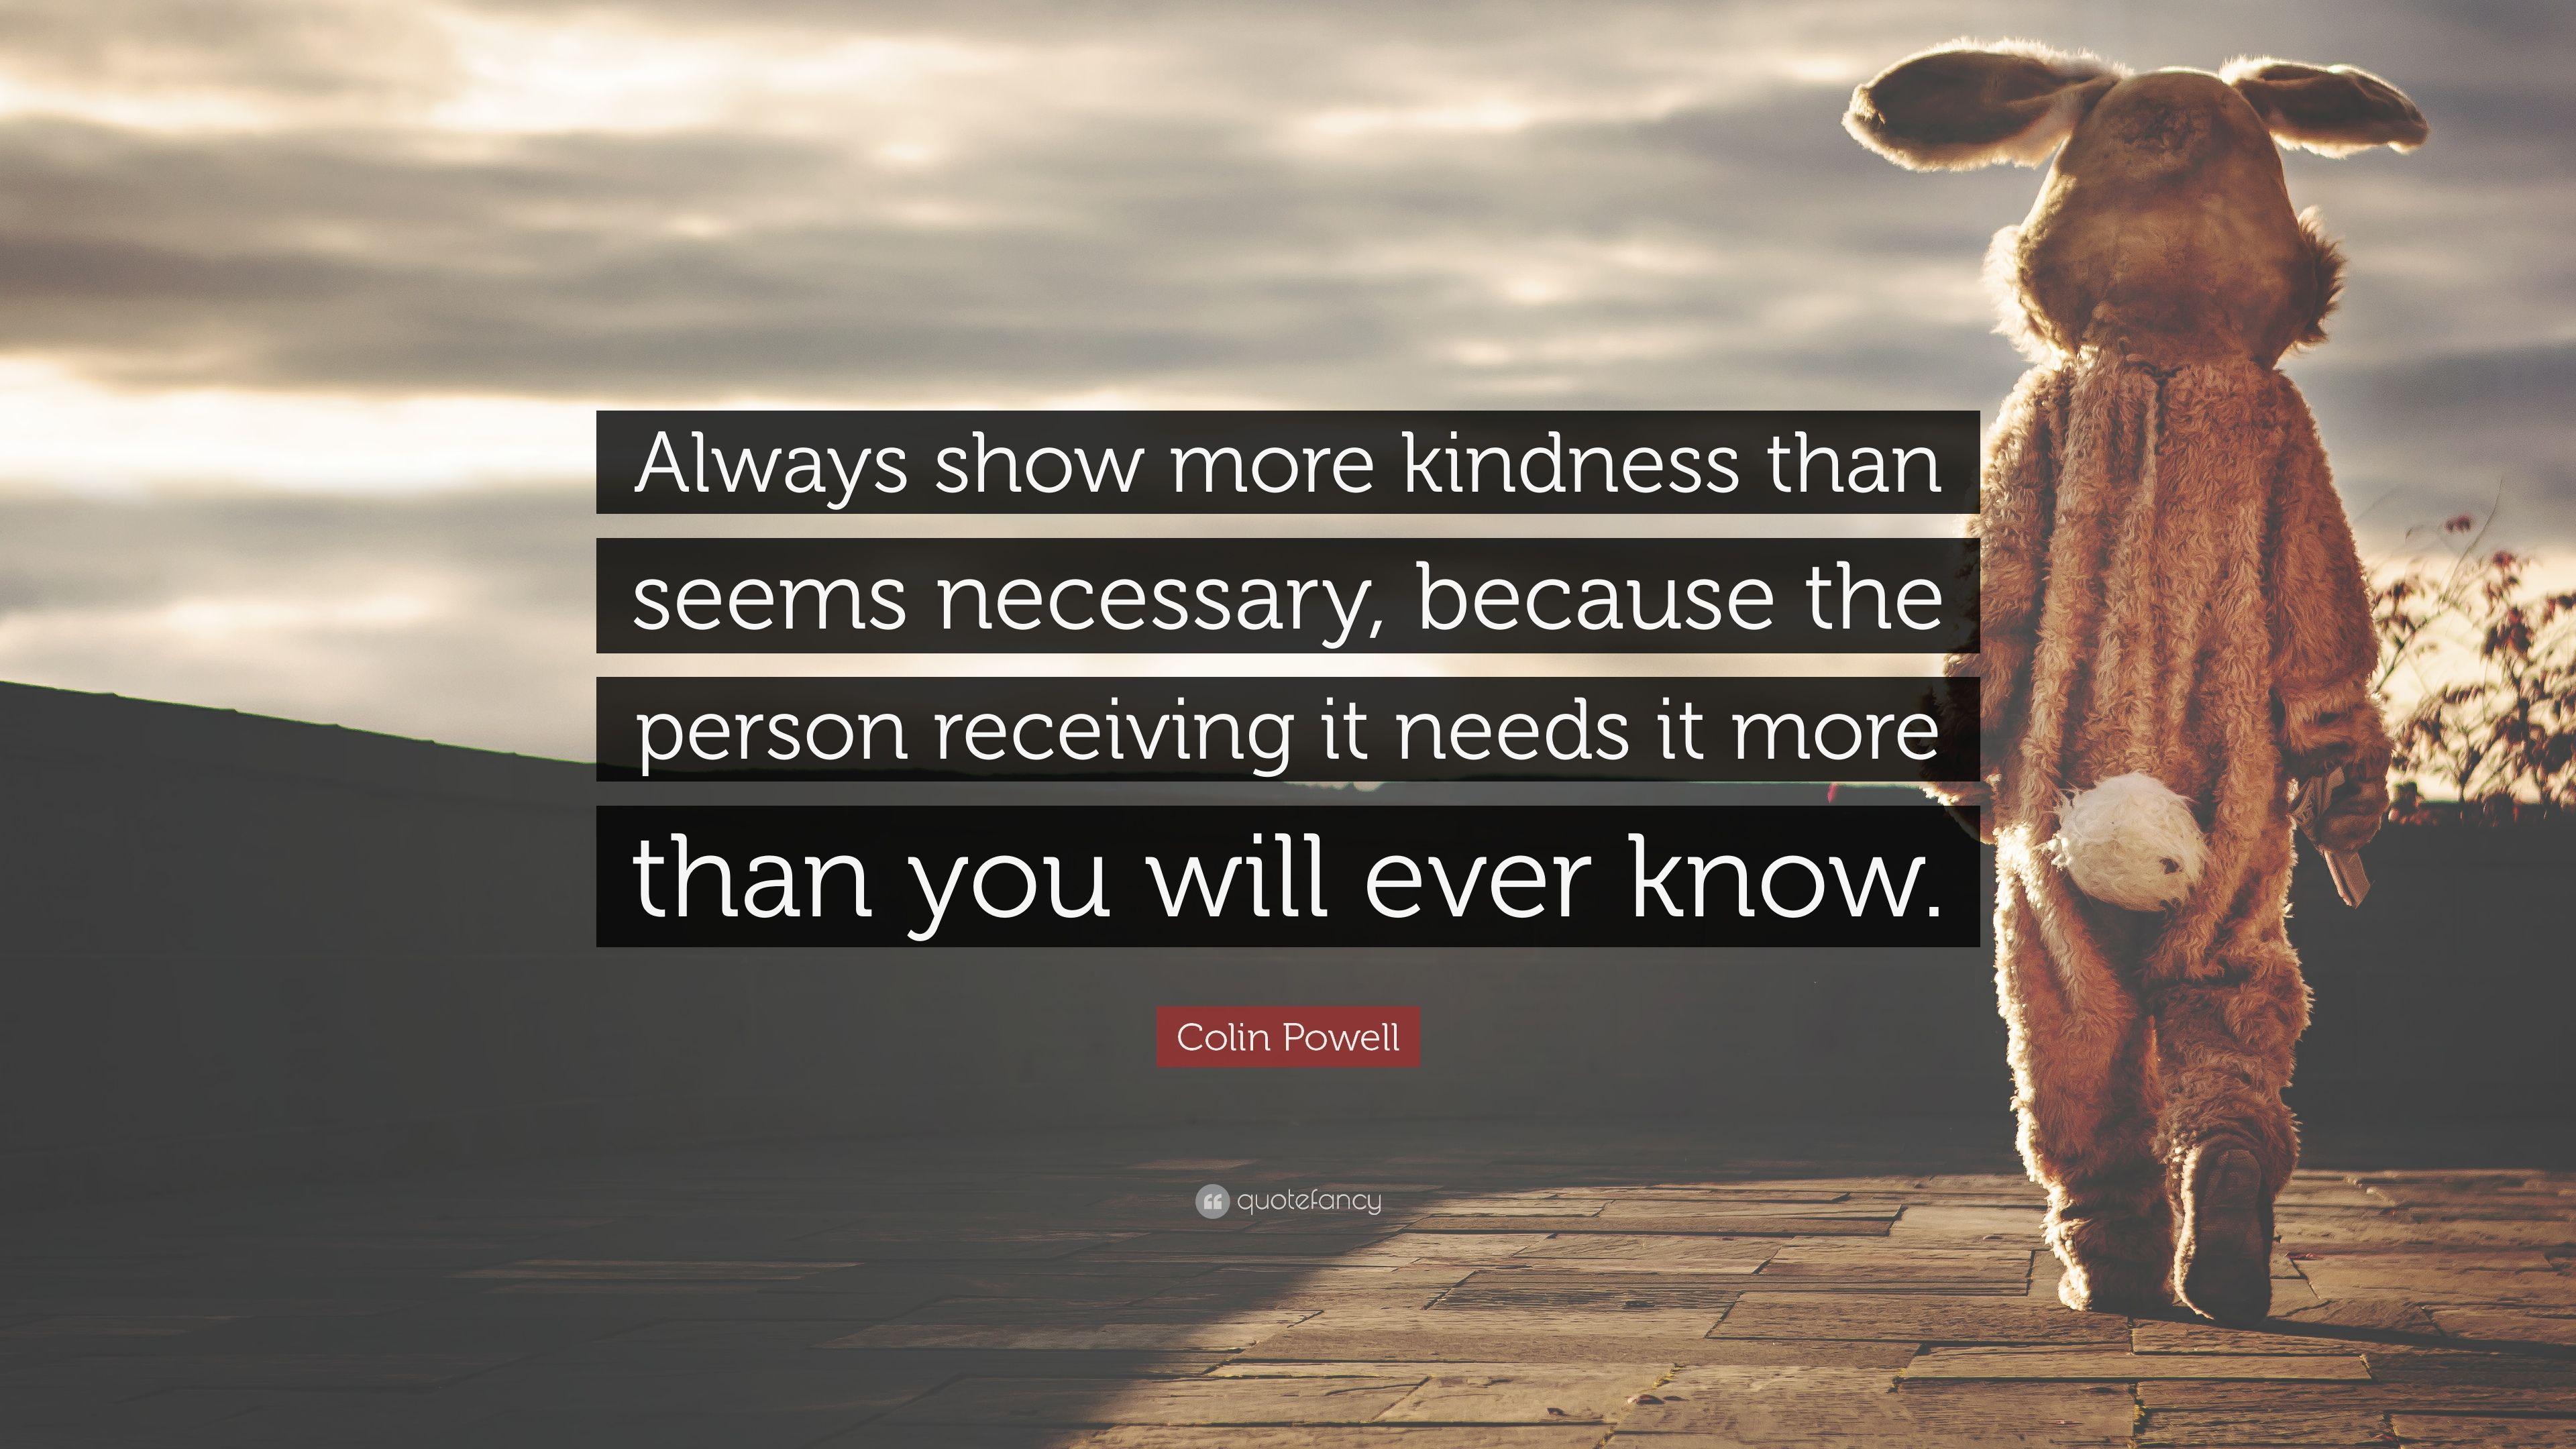 Colin Powell Quote: “Always show more kindness than seems